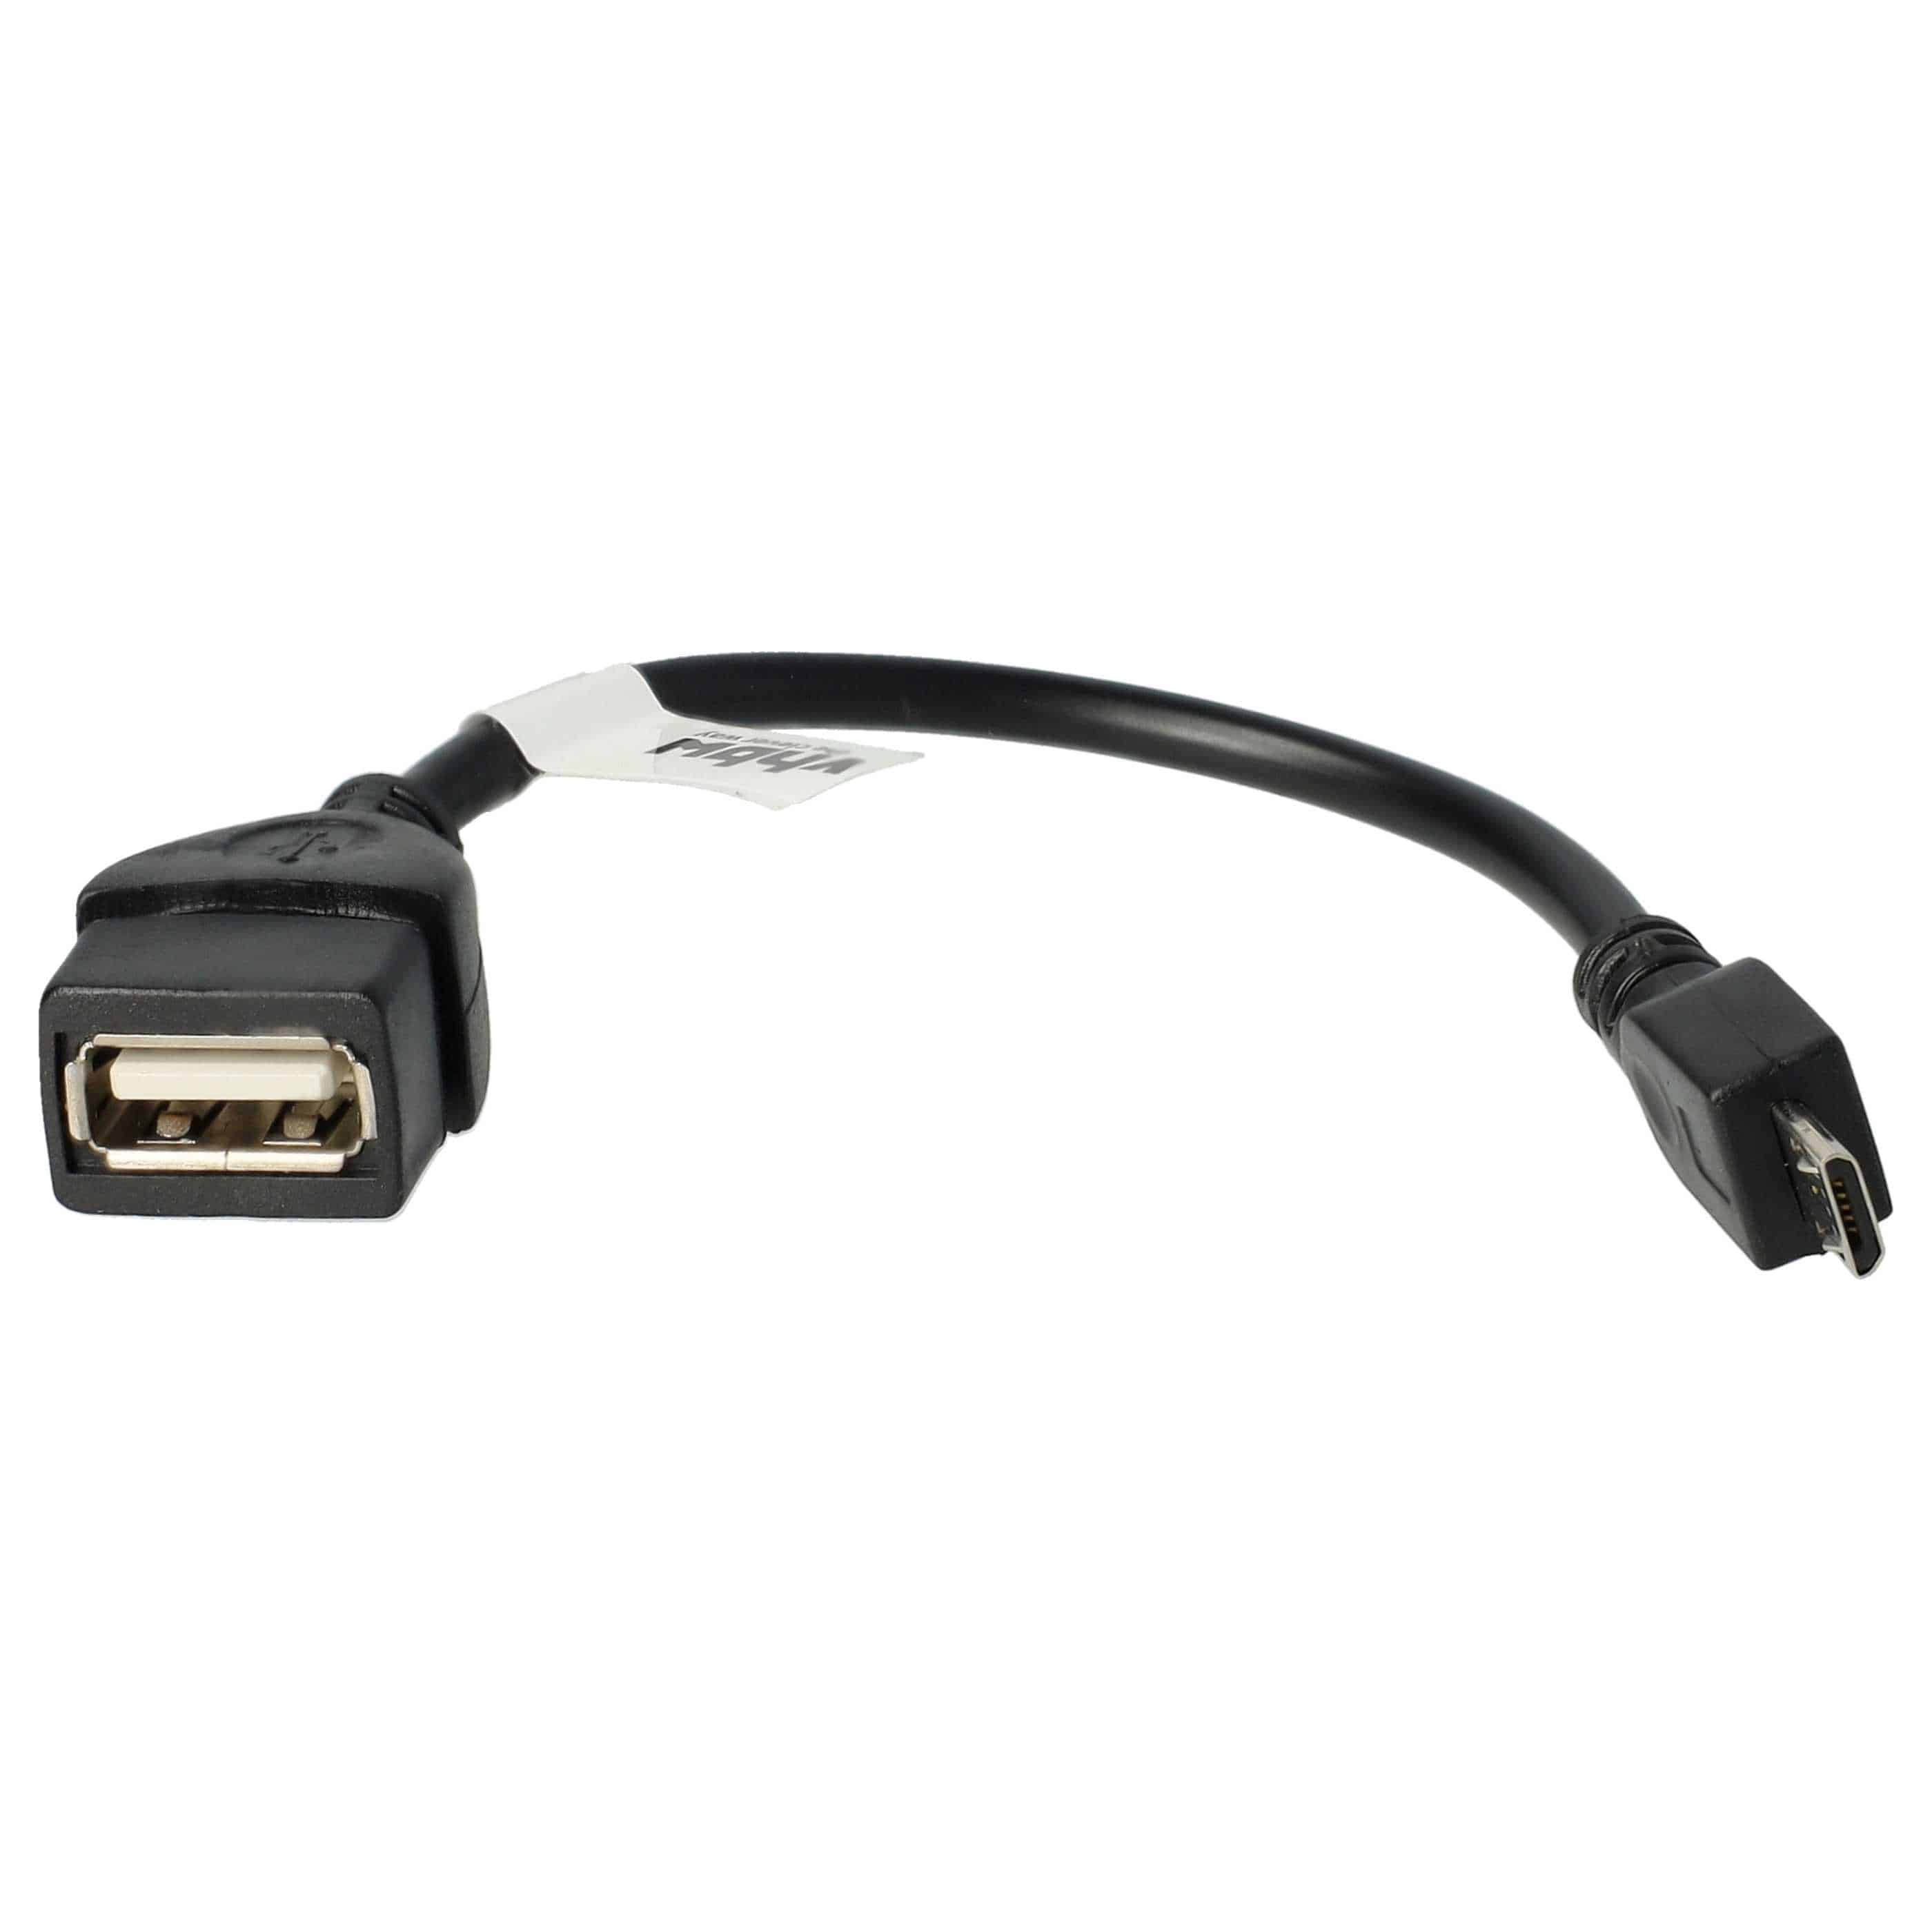 Adapter OTG Micro-USB to USB port (female) for smartphone, tablet, netbook, laptop